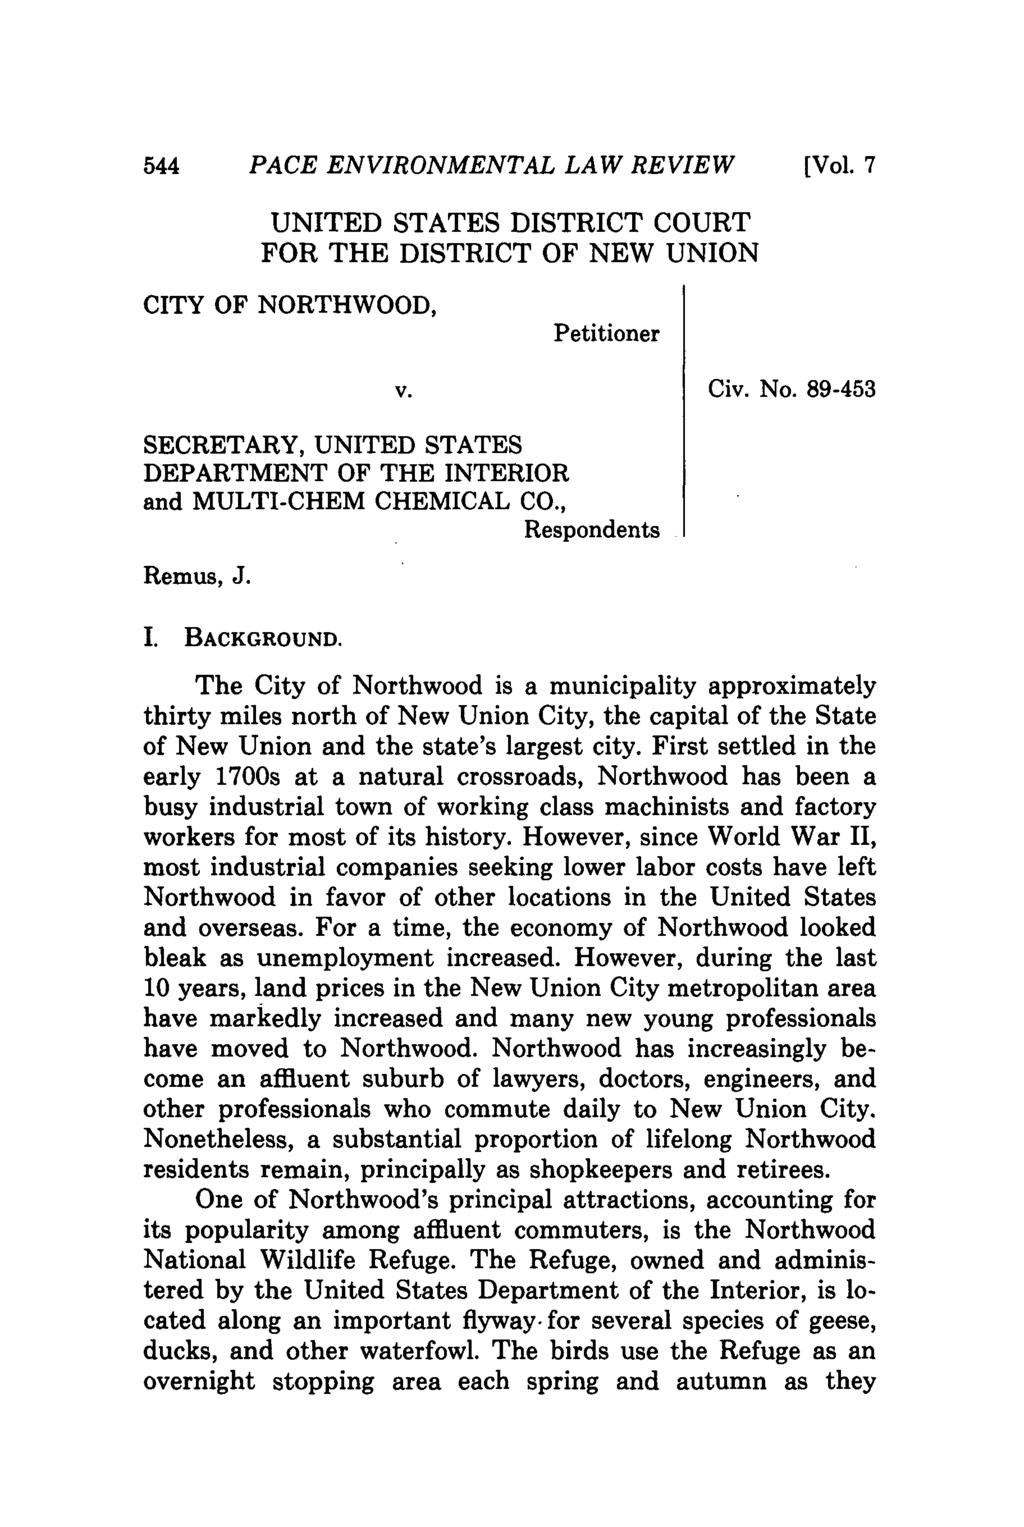 PACE ENVIRONMENTAL LAW REVIEW [Vol. 7 UNITED STATES DISTRICT COURT FOR THE DISTRICT OF NEW UNION CITY OF NORTHWOOD, Petitioner v. Civ. No.